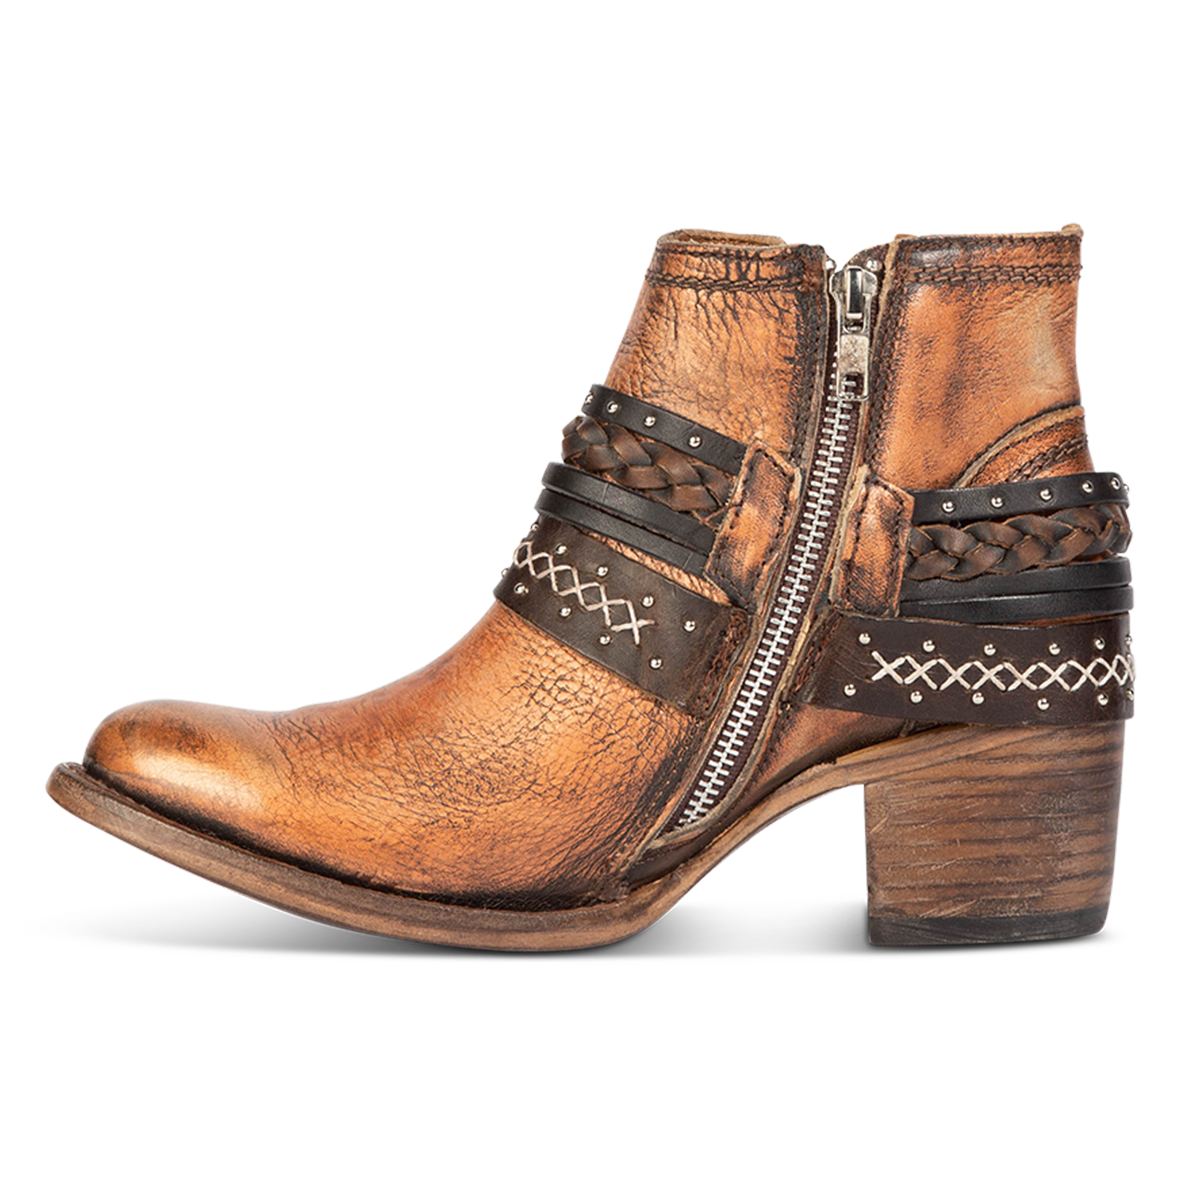 Inside view showing working brass zip closure and embellished decorative belts on FREEBIRD women's Sabelle bronze bootie